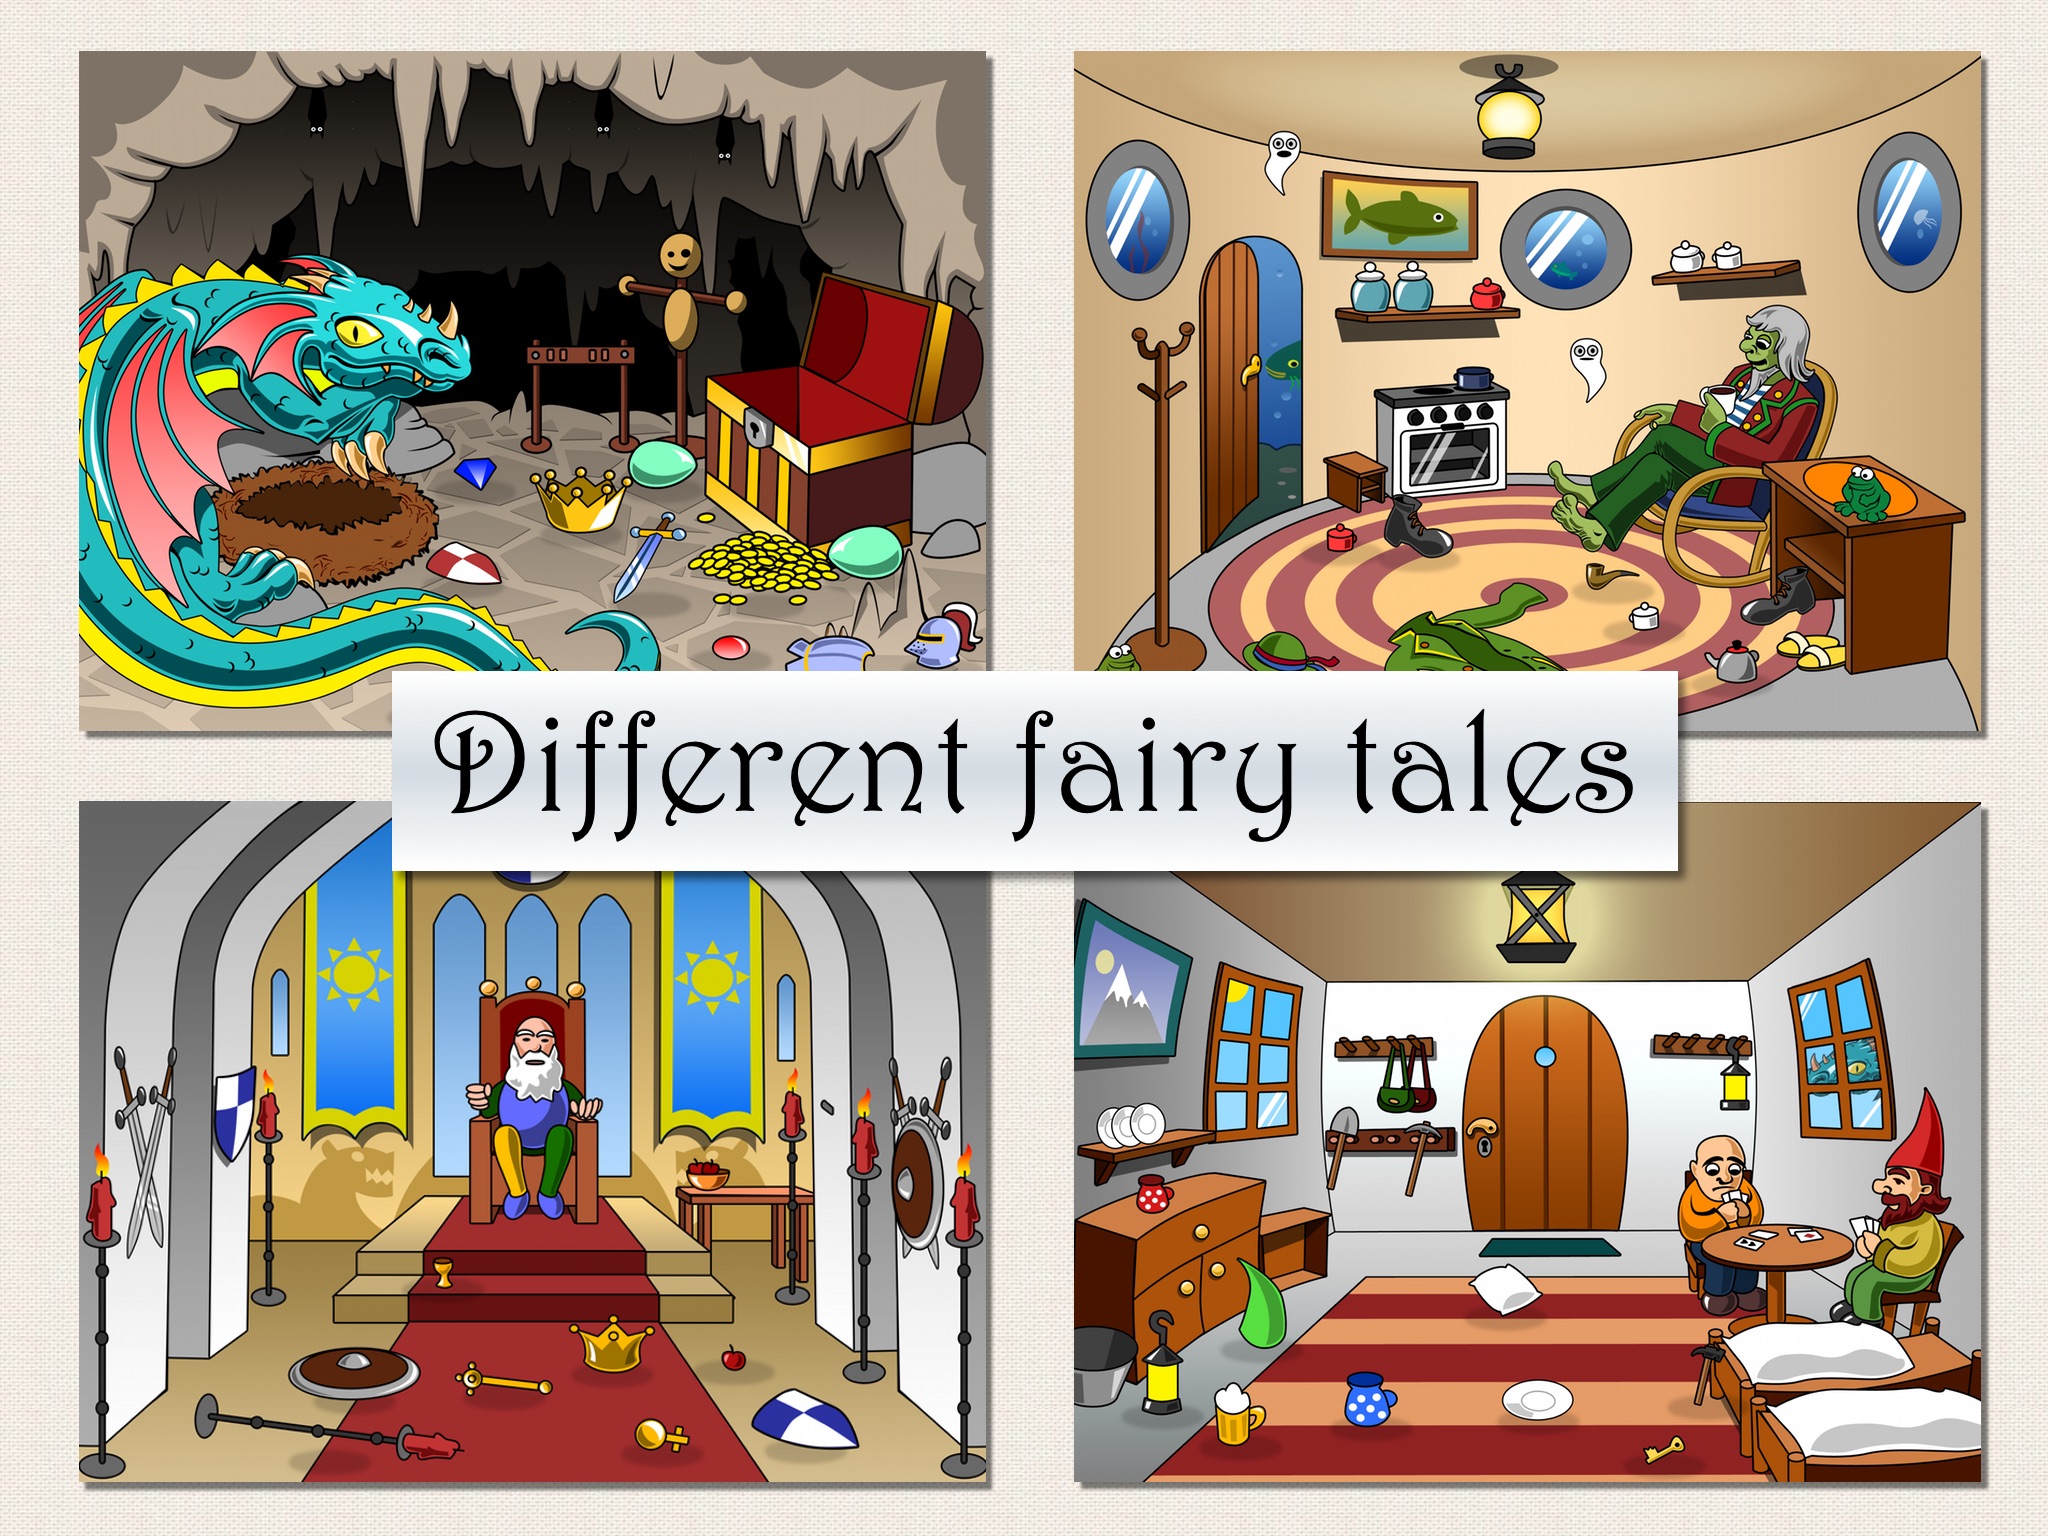 Fantasy tidy up - fairy tale cleaning game screenshot 3